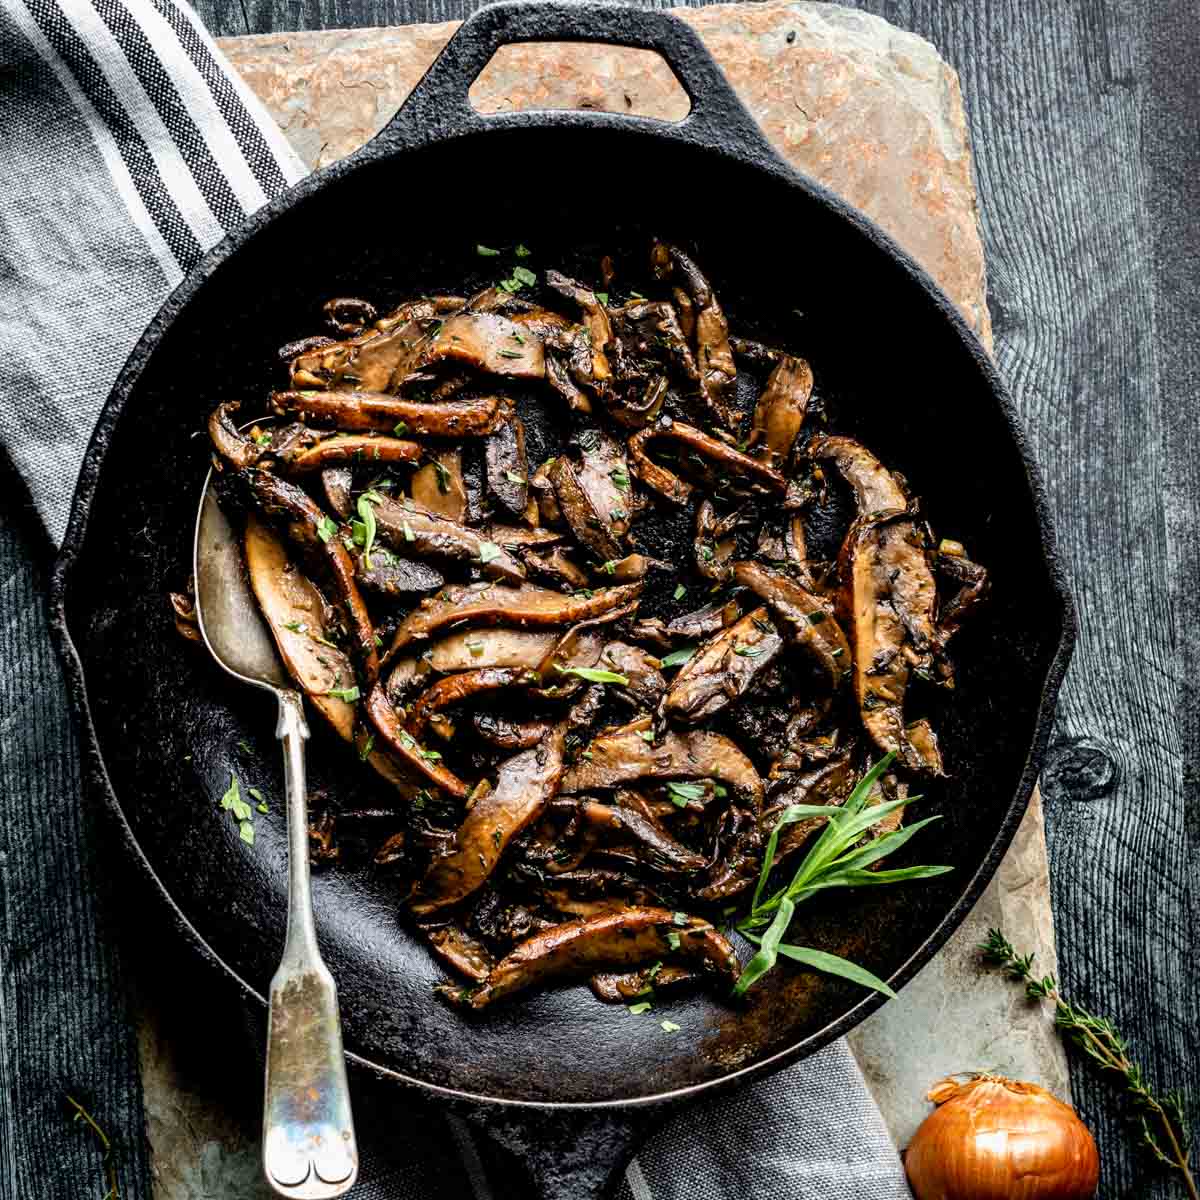 Roasted mushrooms in a skillet on a wooden board.